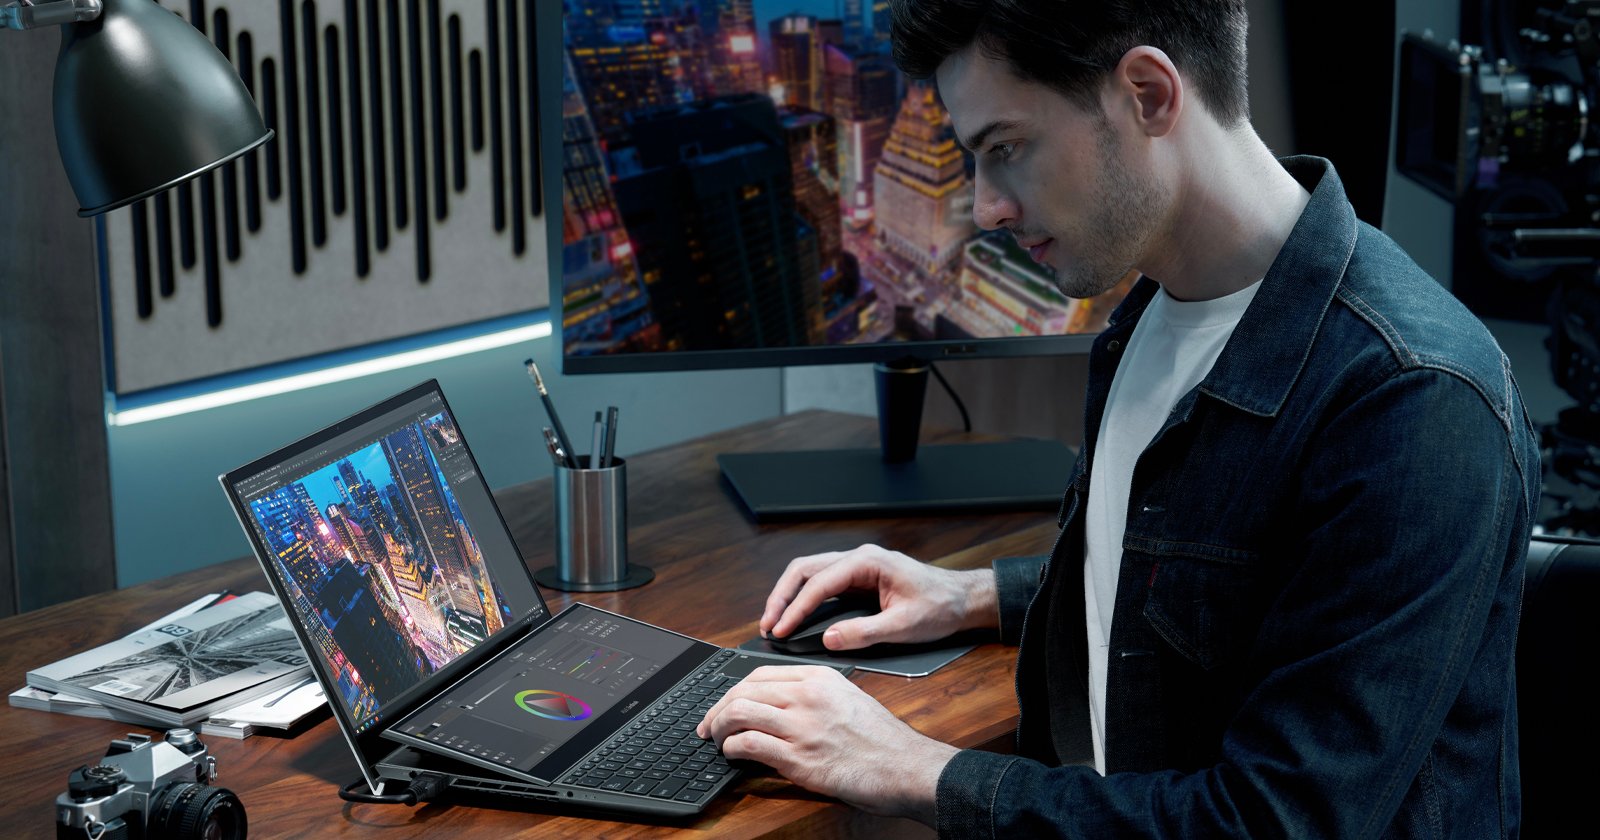 Asus’ new dual-screen Zenbooks aimed at creative products actually look practical